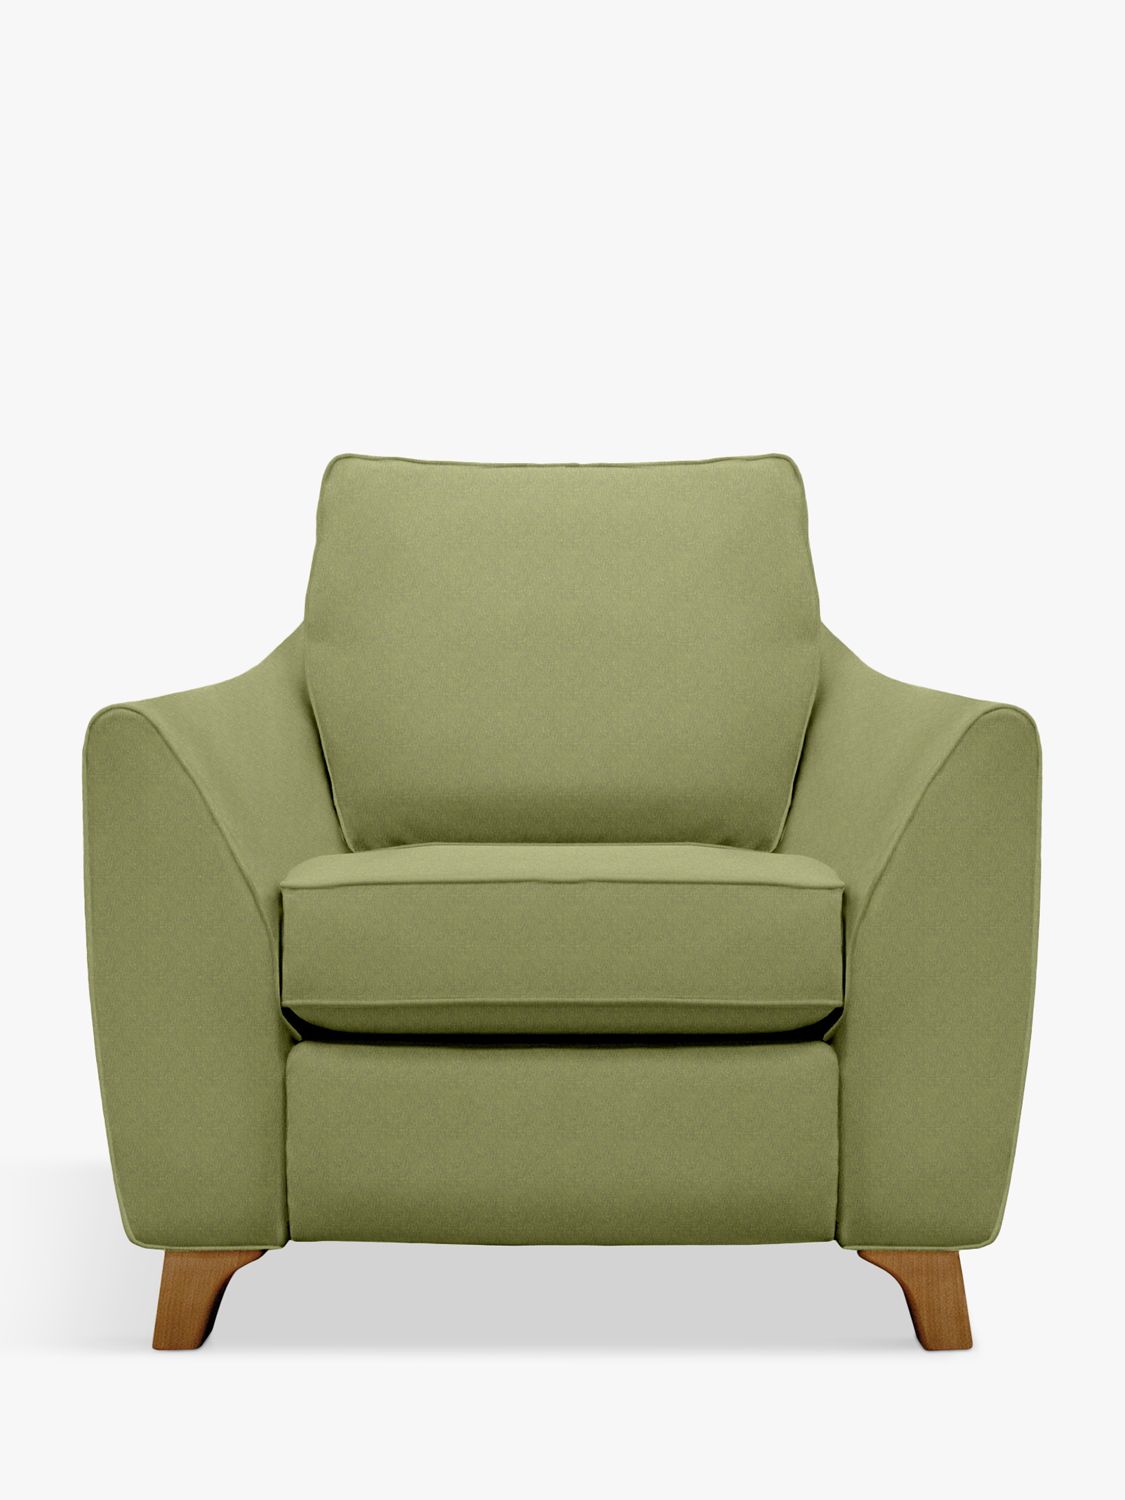 The Sixty Eight Range, G Plan Vintage The Sixty Eight Armchair with Footrest Mechanism, Marl Green